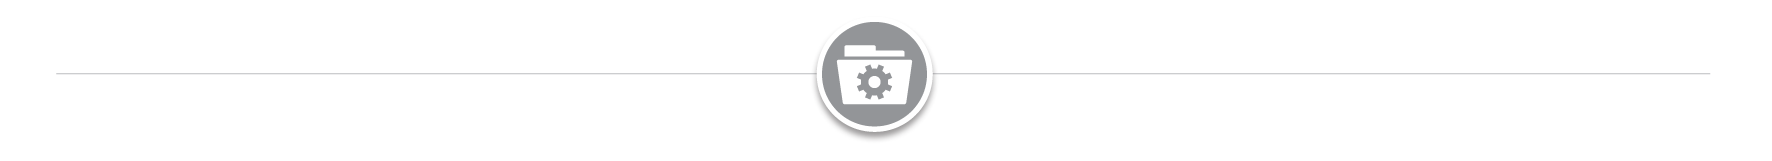 Hosted Document Review icon image